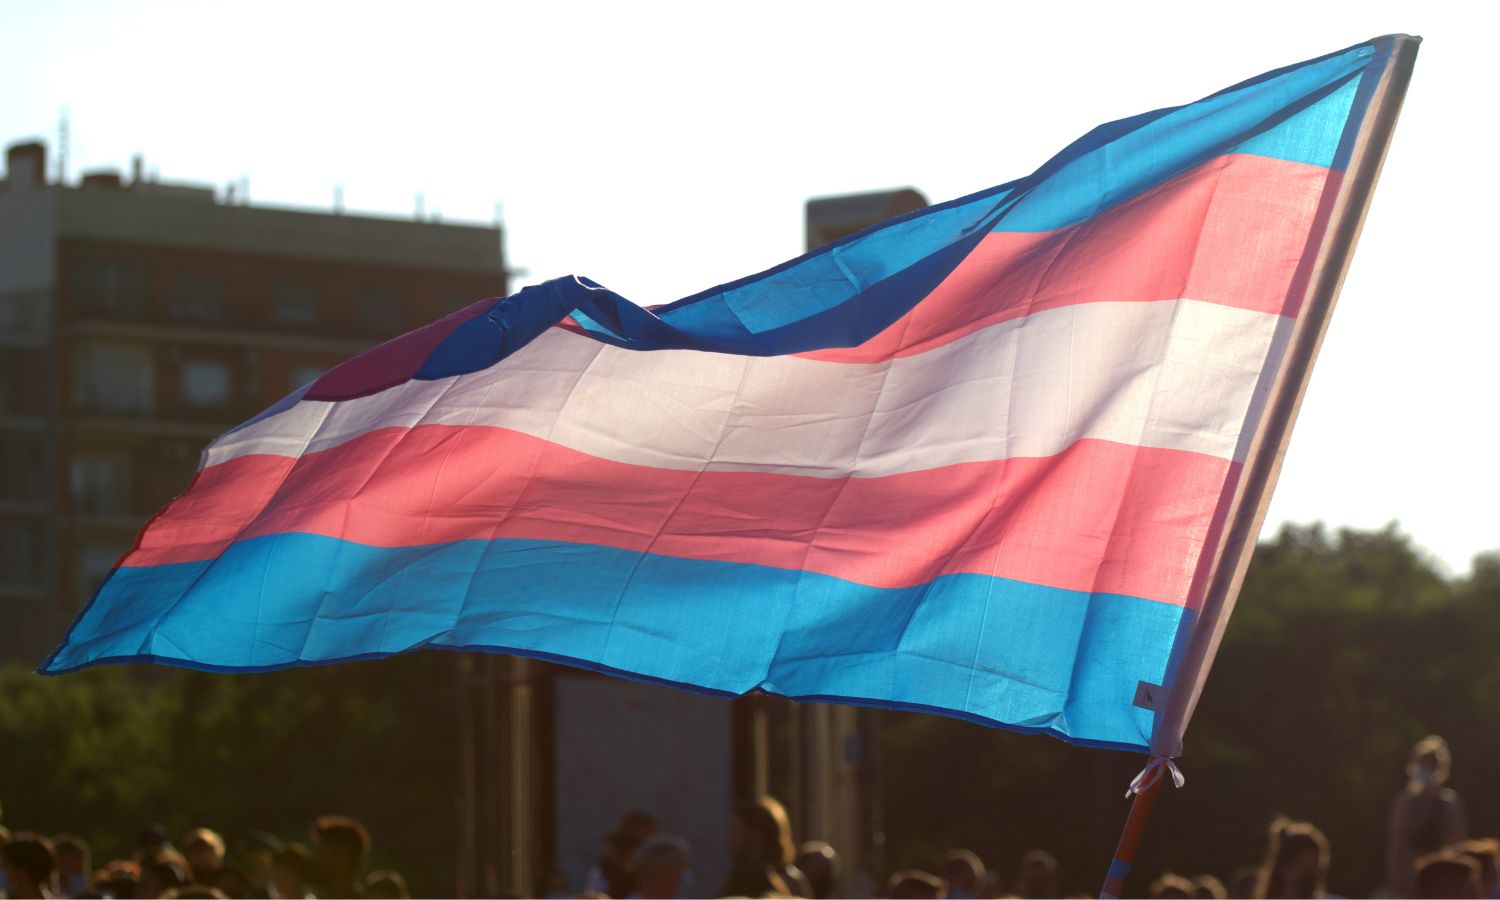 Queensland has updated its laws to make transitioning easier for trans people.